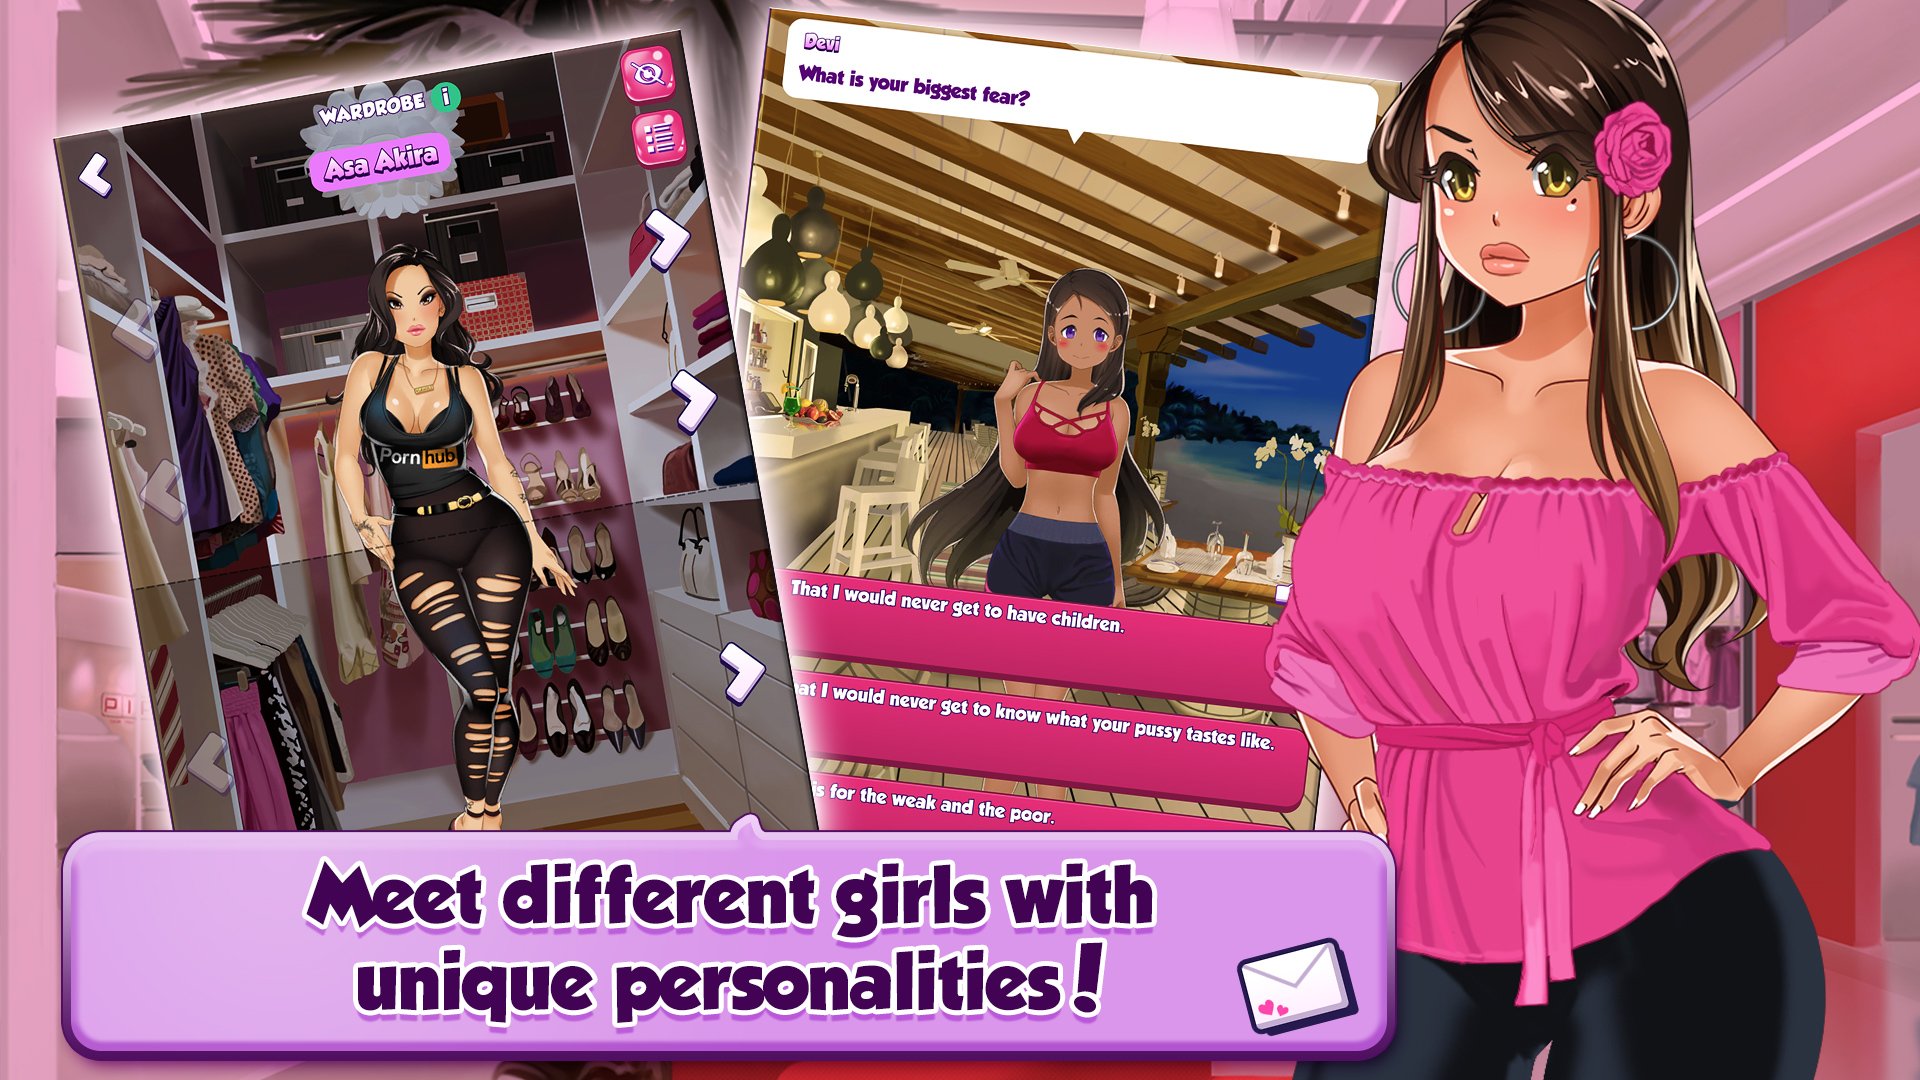 Play Booty Calls Dating Sim On Android - Android Porn Games-1591